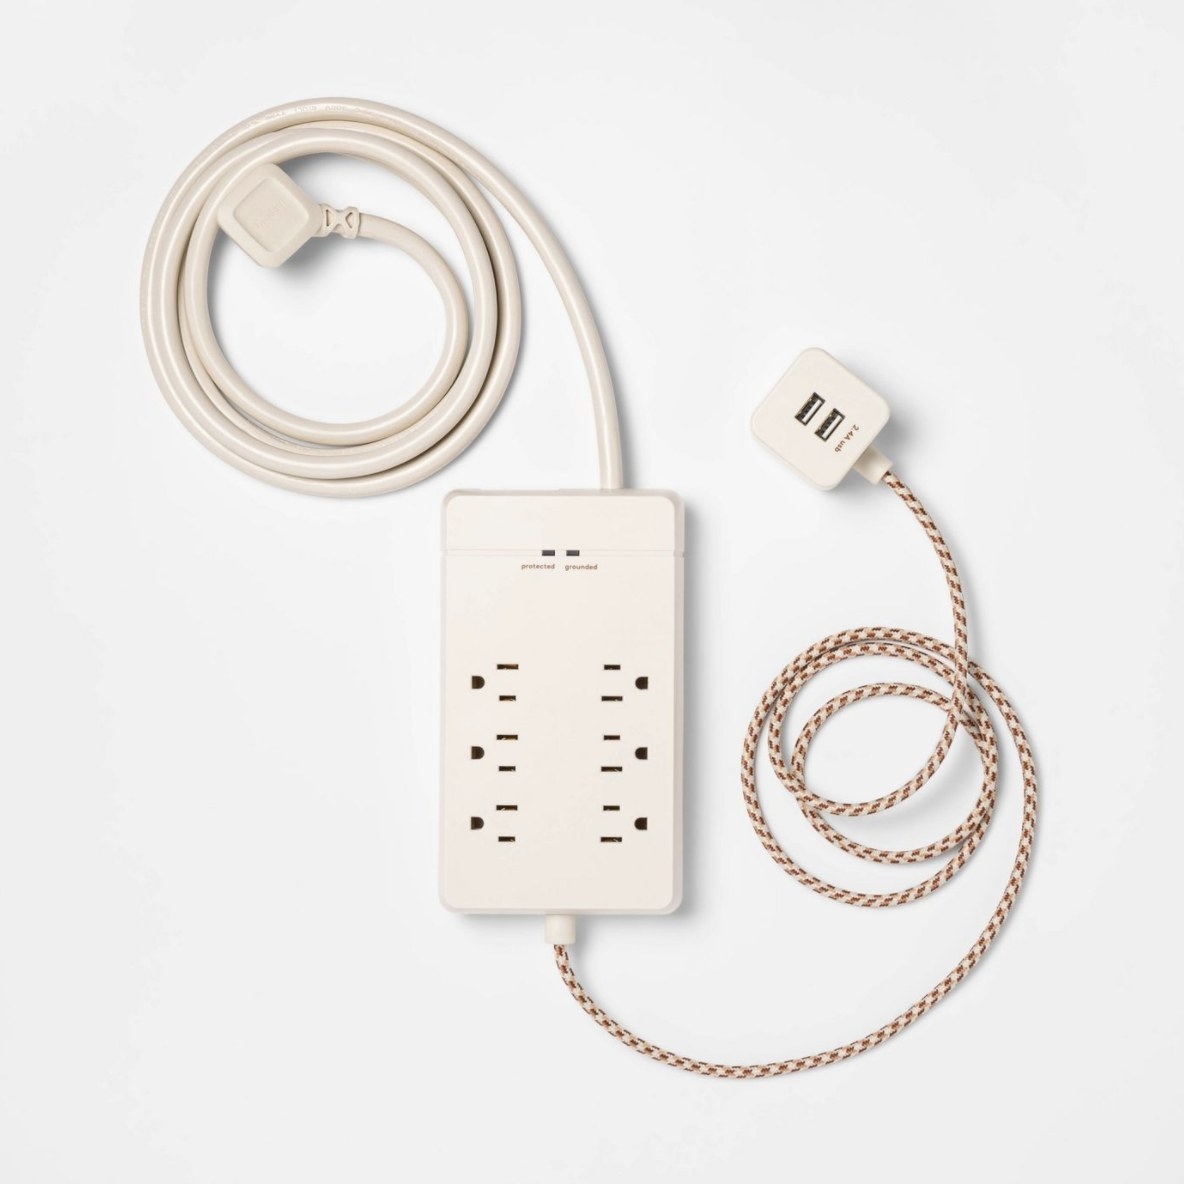 The cream extension cord has six outlet spots and a braided cord with two USB outlets